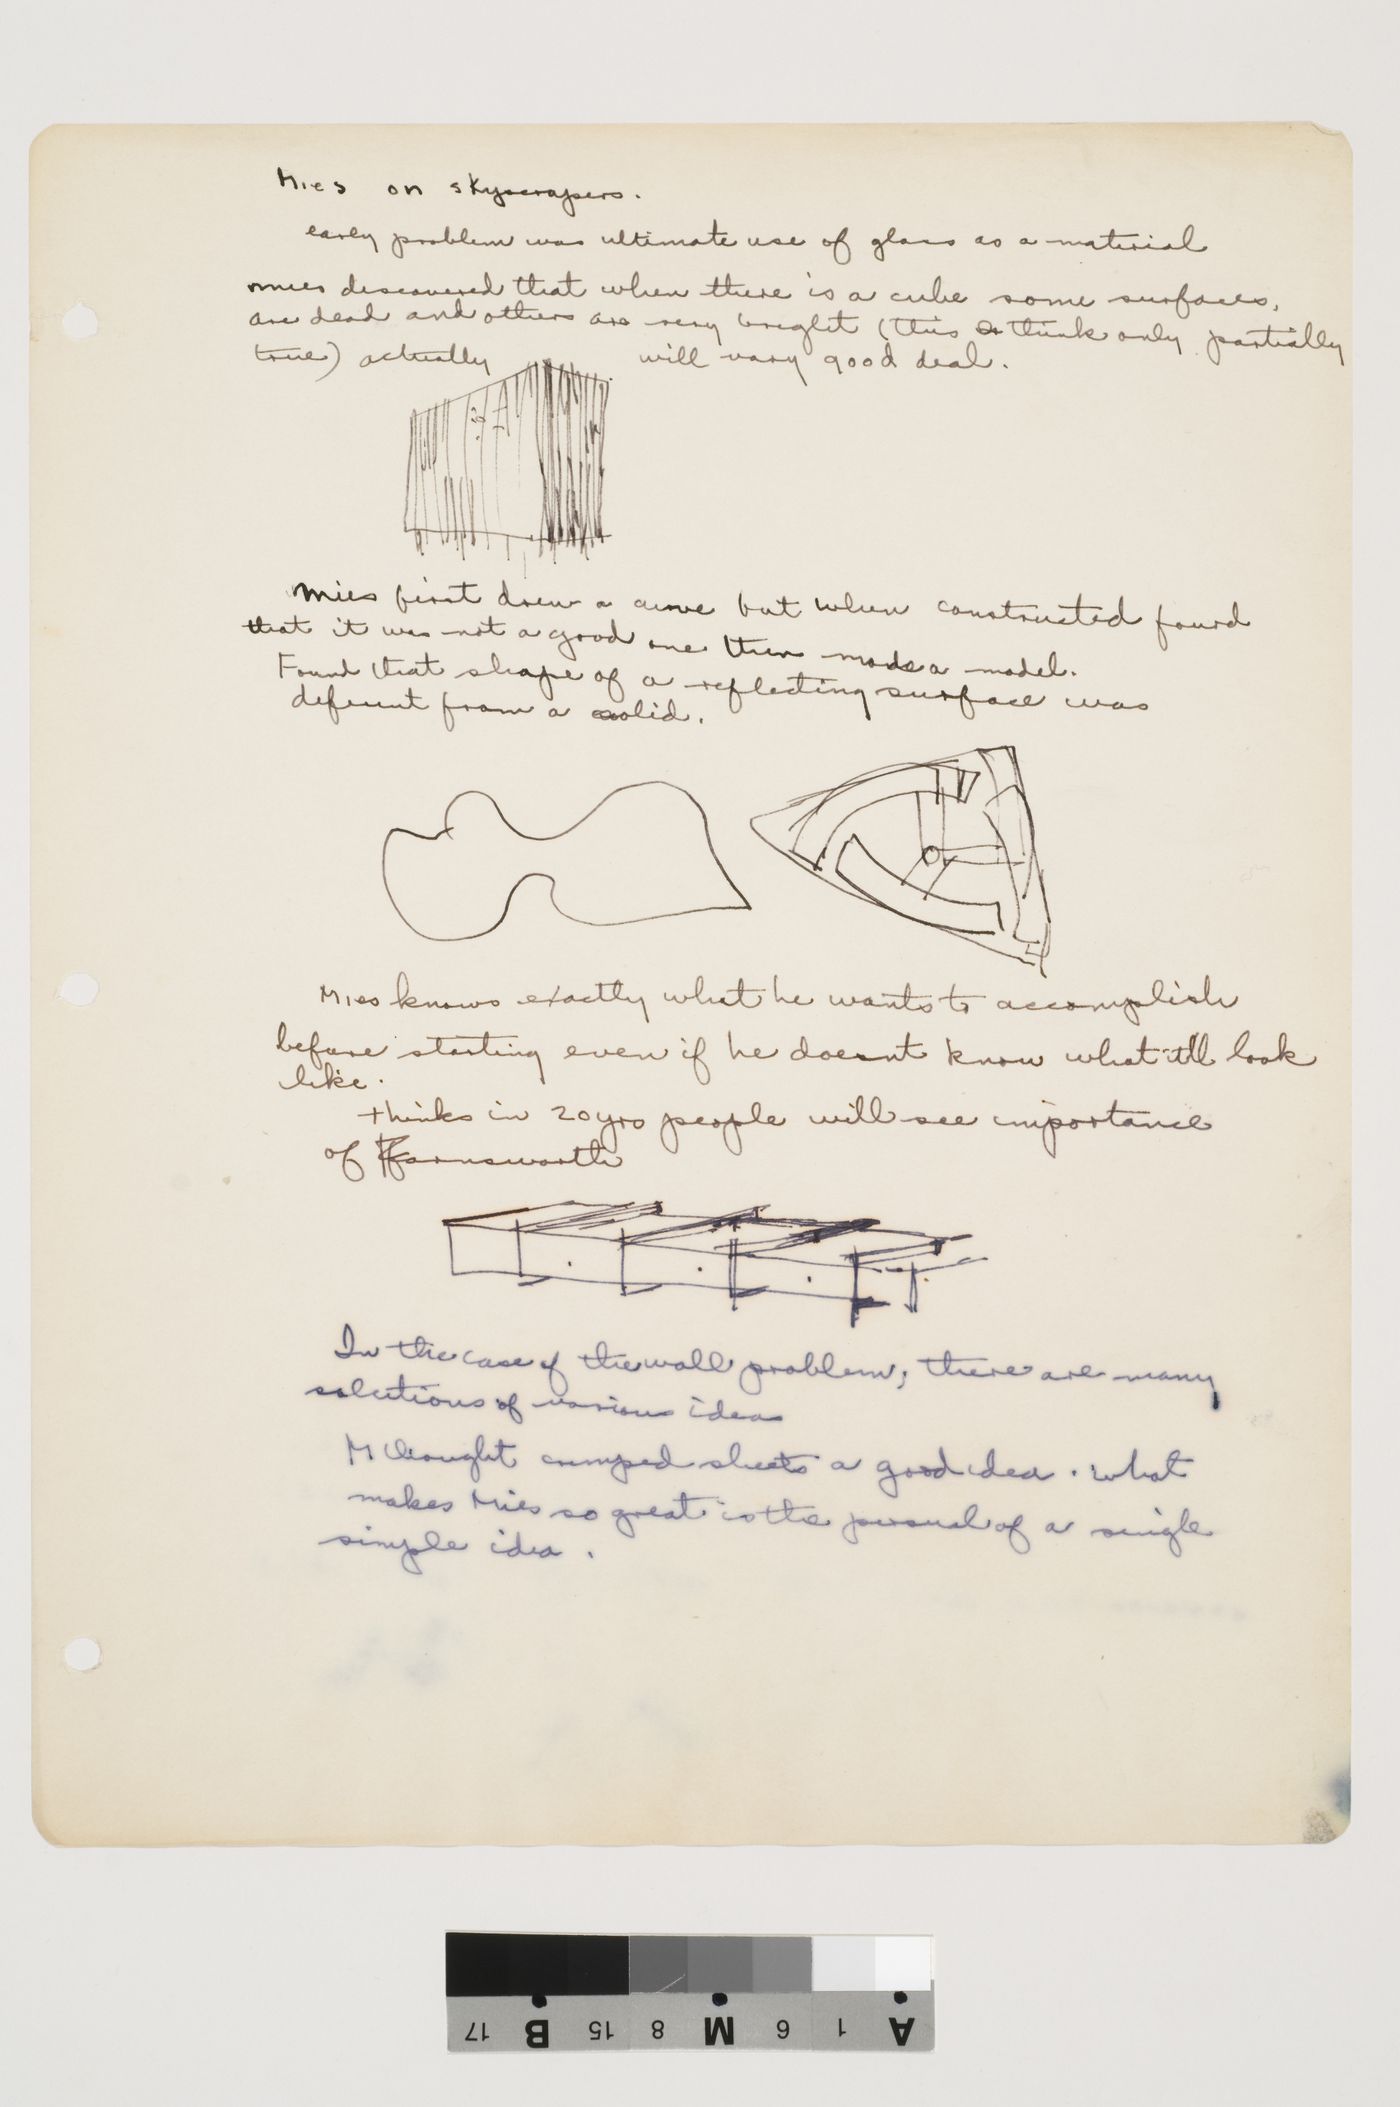 Notes about Mies's ideas on skyscrapers, glass as a material, and Farnsworth House, with sketches